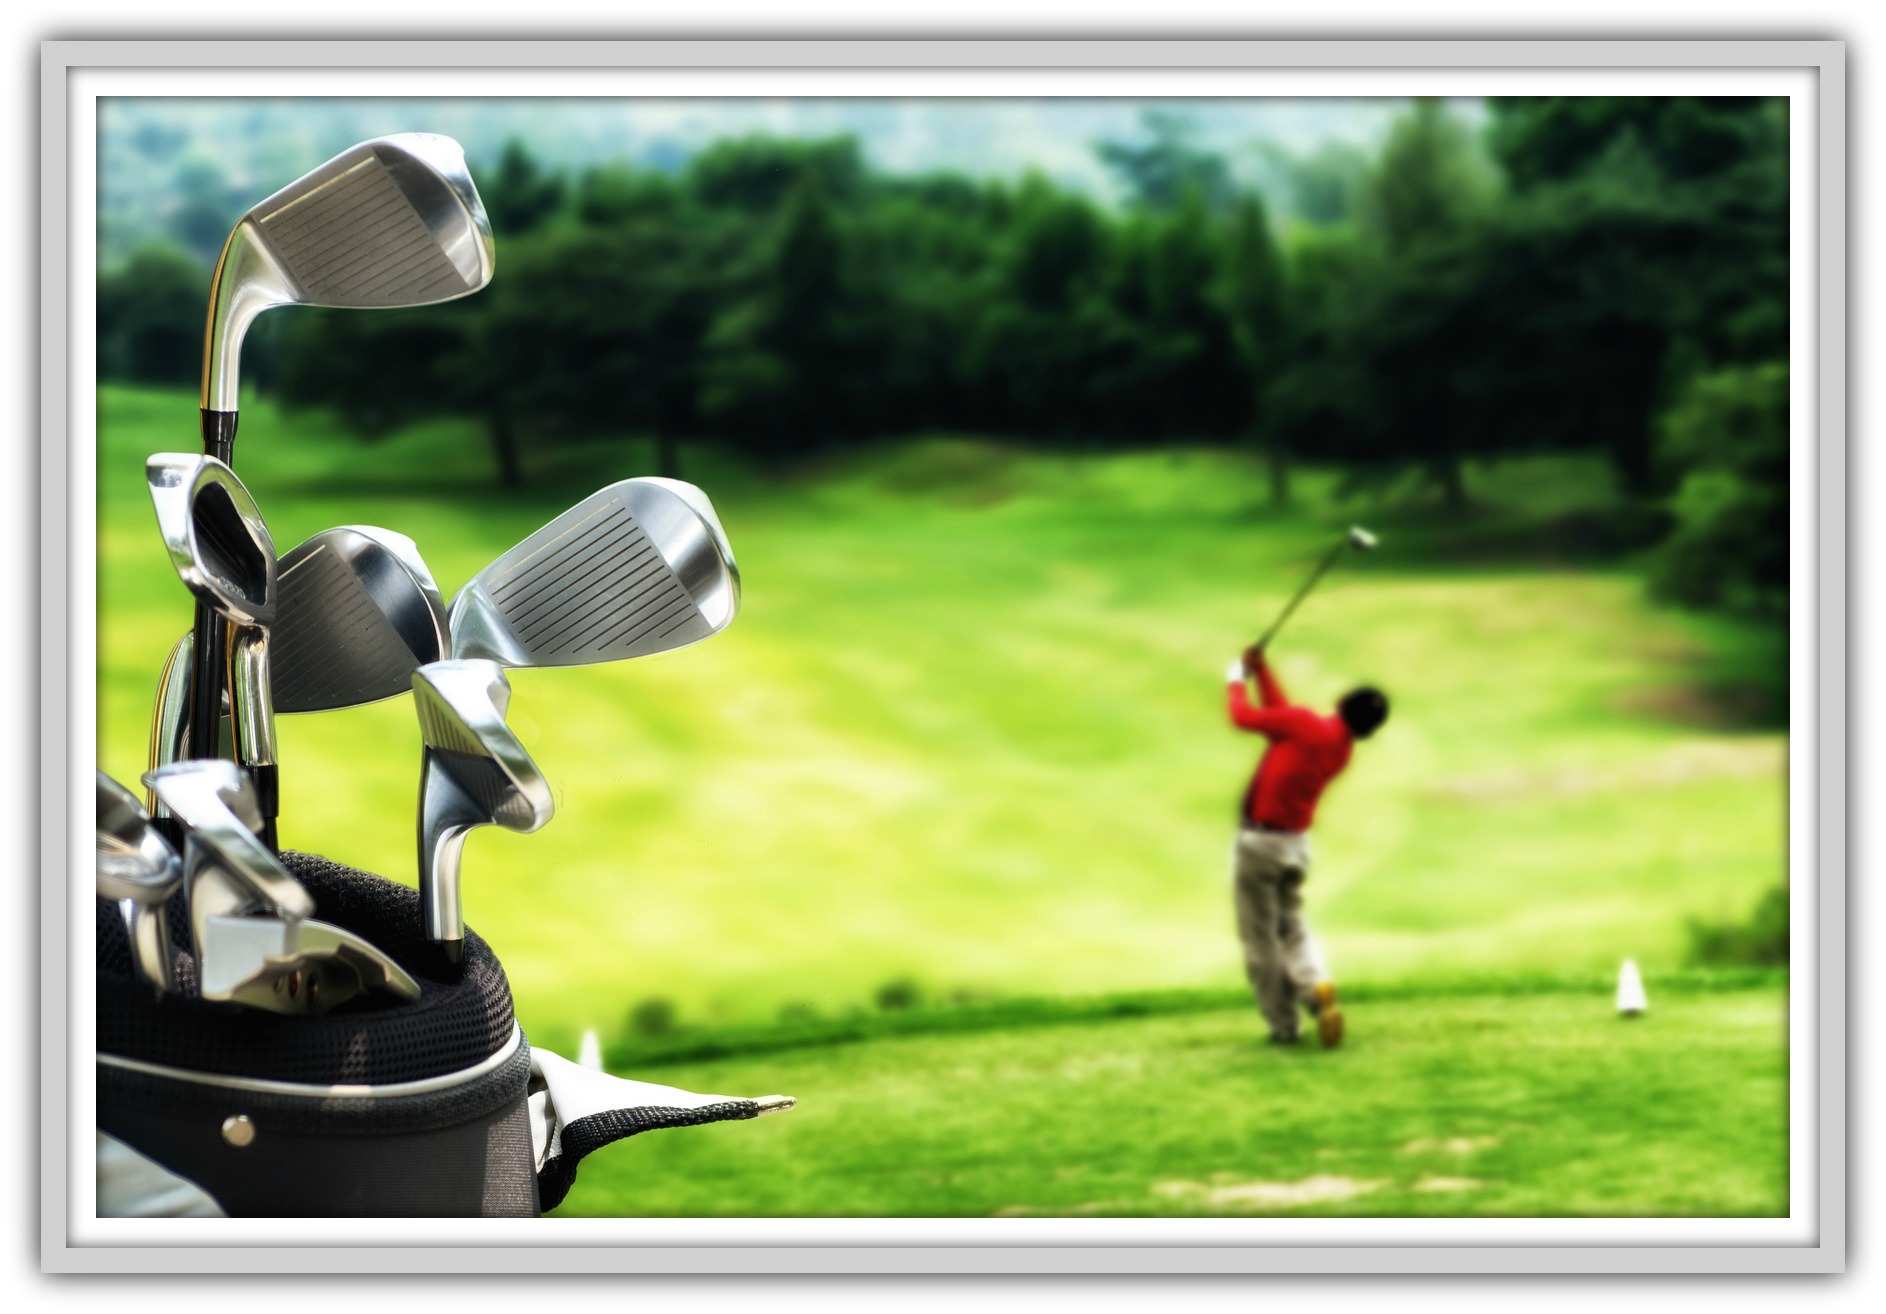 Best images series of golf as a sport, hobby and or lifestyle